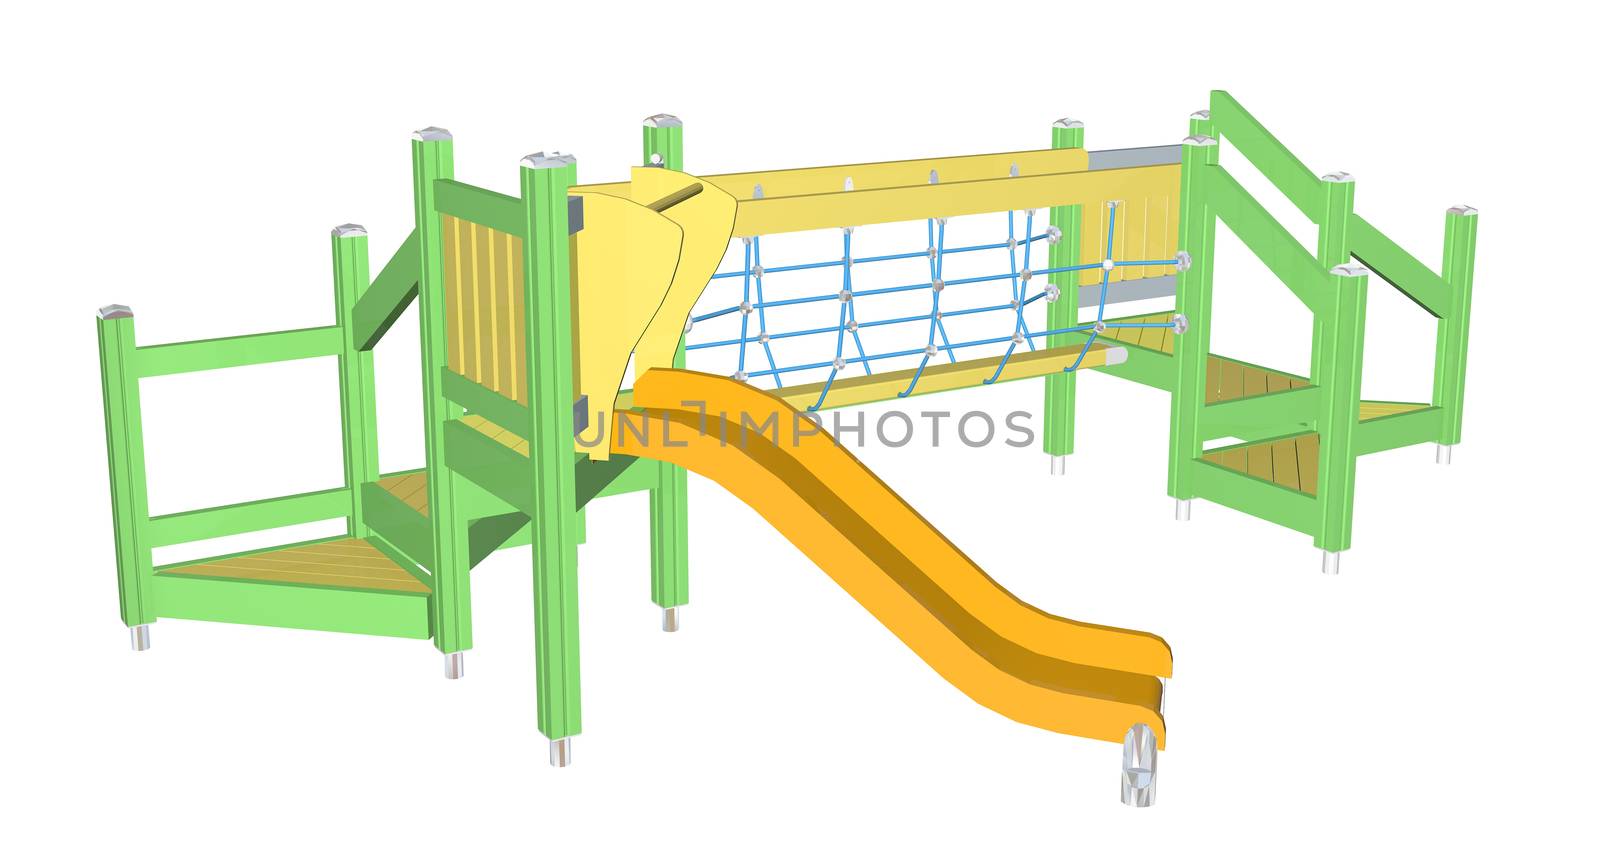 Kiddie Slide and Crawling Net, yellow and green, 3D illustration, isolated against a white background.